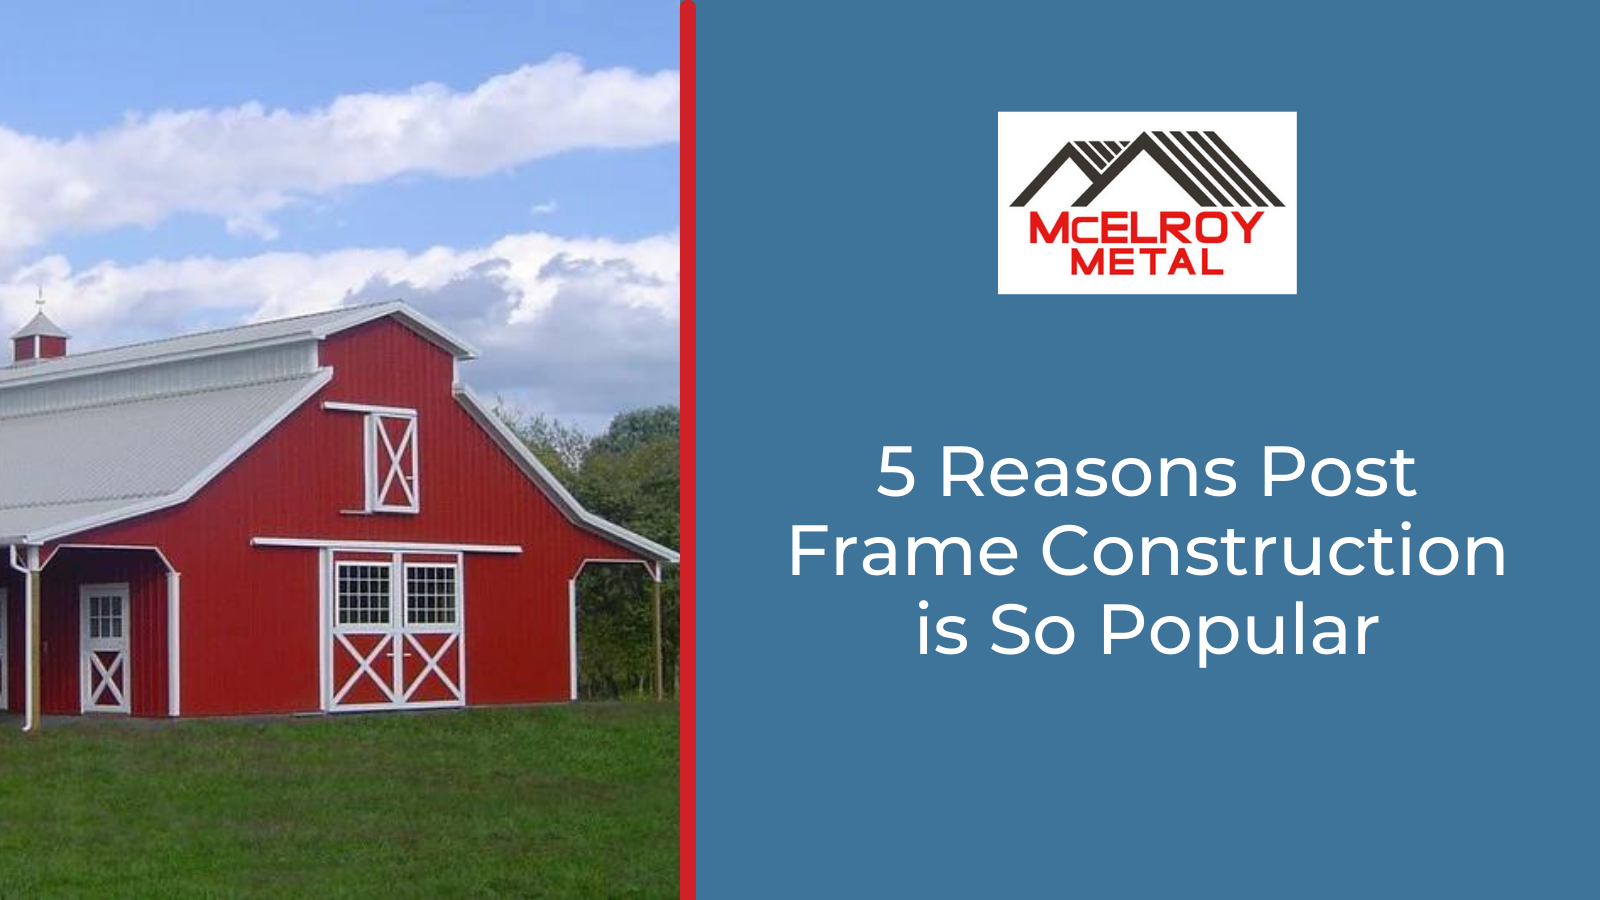 5 Reasons Post Frame Construction is So Popular